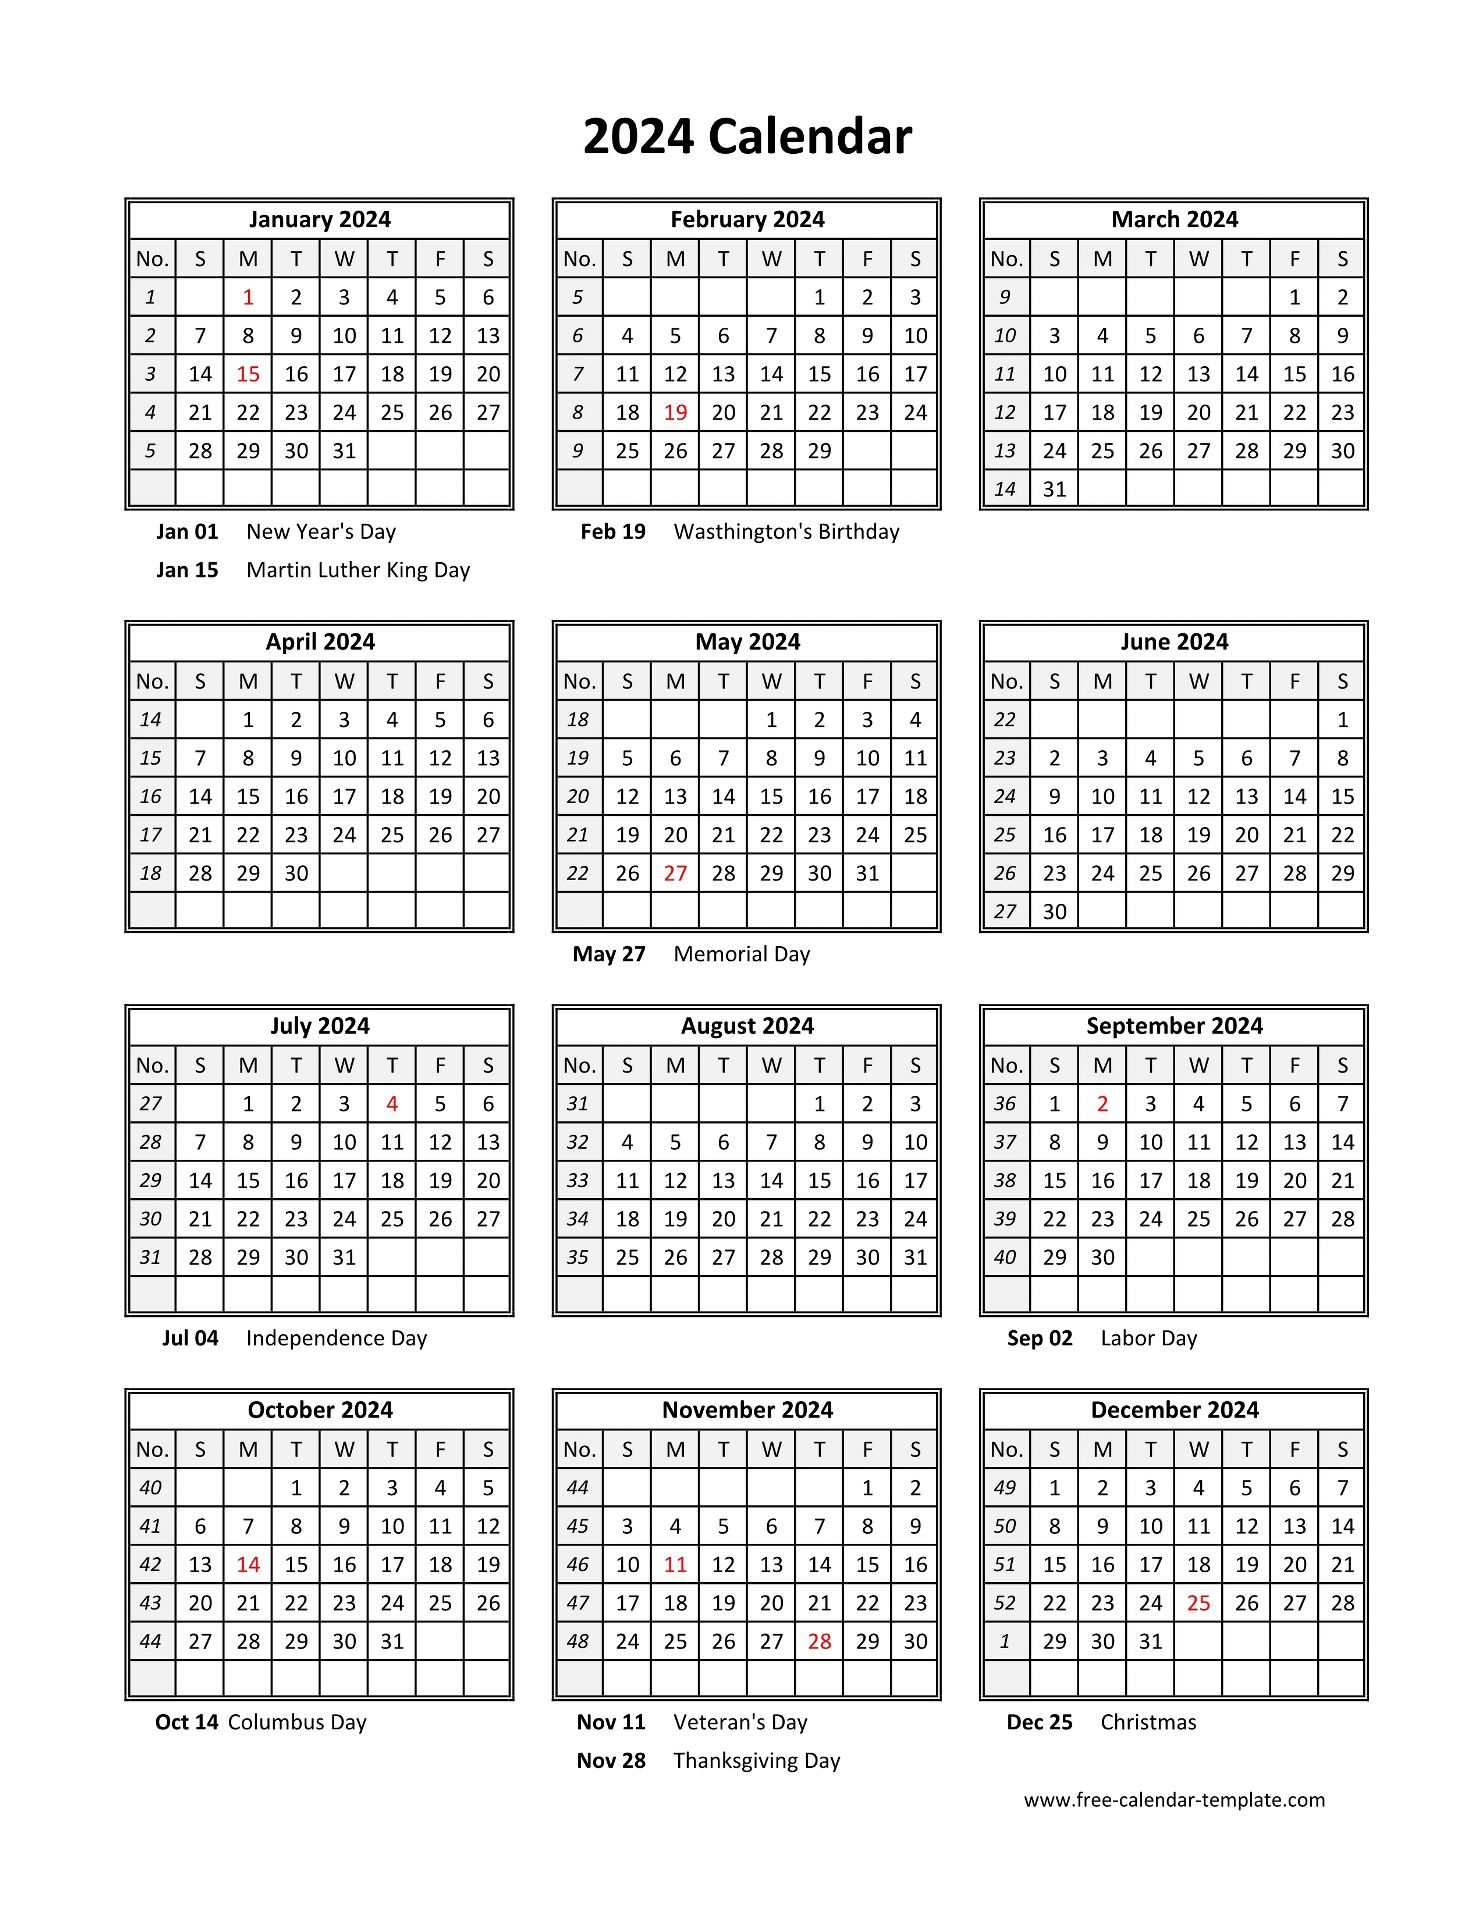 Yearly Printable Calendar 2024 With Holidays | Free-Calendar | Free Printable Yearly Calendar 2024 With Lines